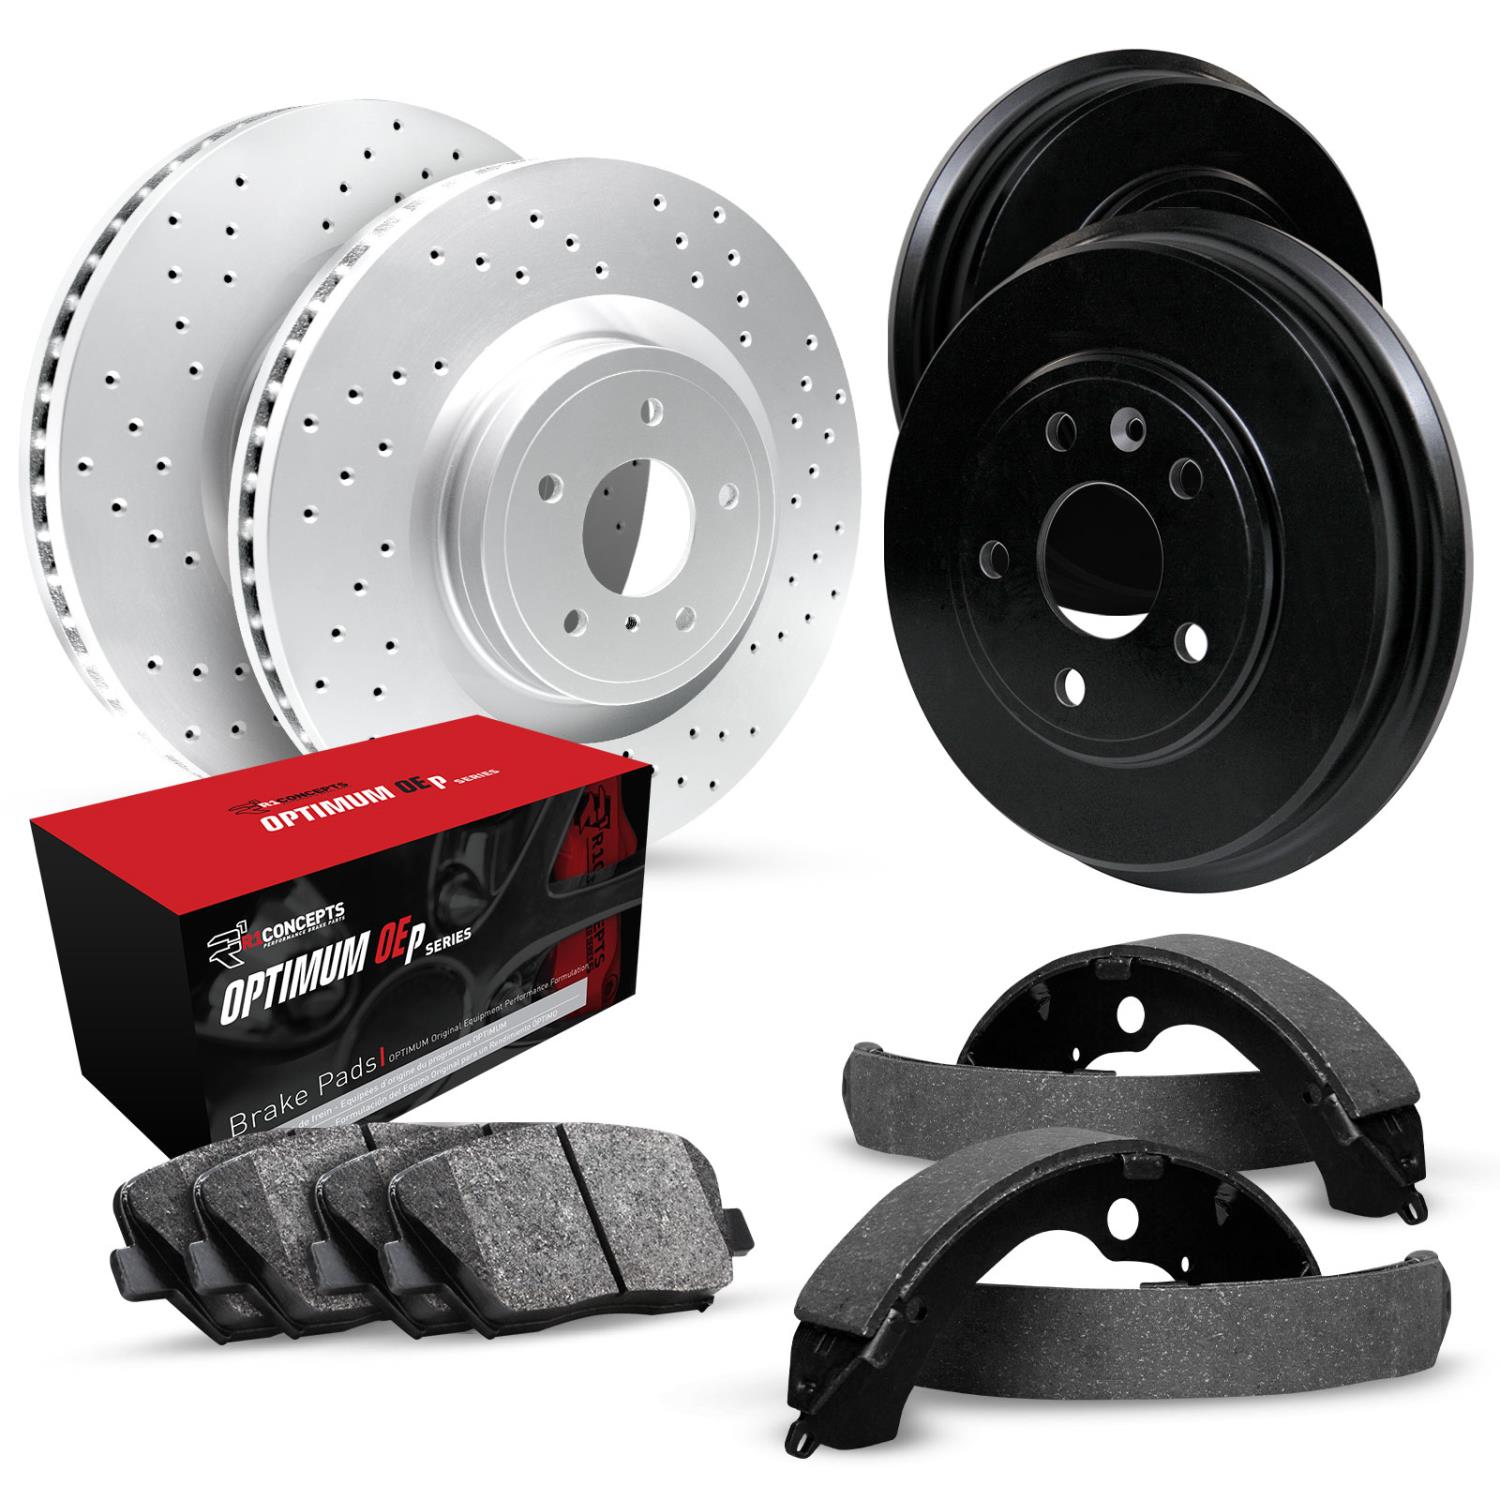 GEO-Carbon Drilled Brake Rotor & Drum Set w/Optimum OE Pads & Shoes, 1972-1975 GM, Position: Front & Rear